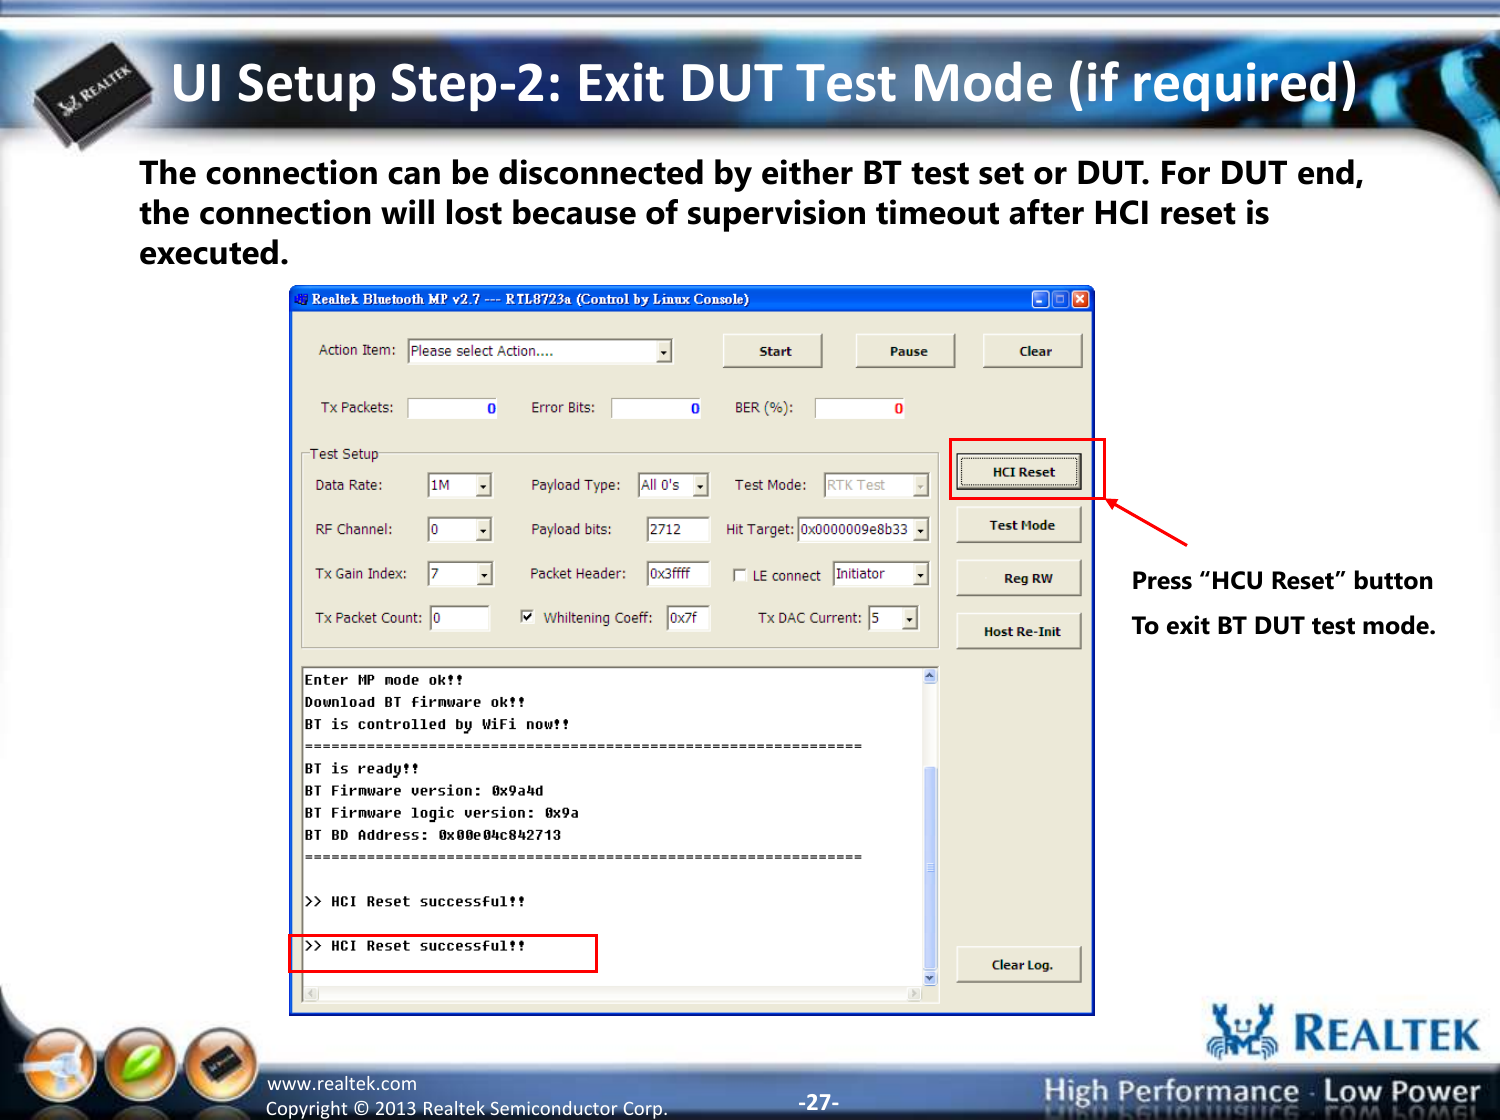 -27- Copyright ©  2013 Realtek Semiconductor Corp. www.realtek.com UI Setup Step-2: Exit DUT Test Mode (if required) The connection can be disconnected by either BT test set or DUT. For DUT end, the connection will lost because of supervision timeout after HCI reset is executed. Press “HCU Reset” button To exit BT DUT test mode. 